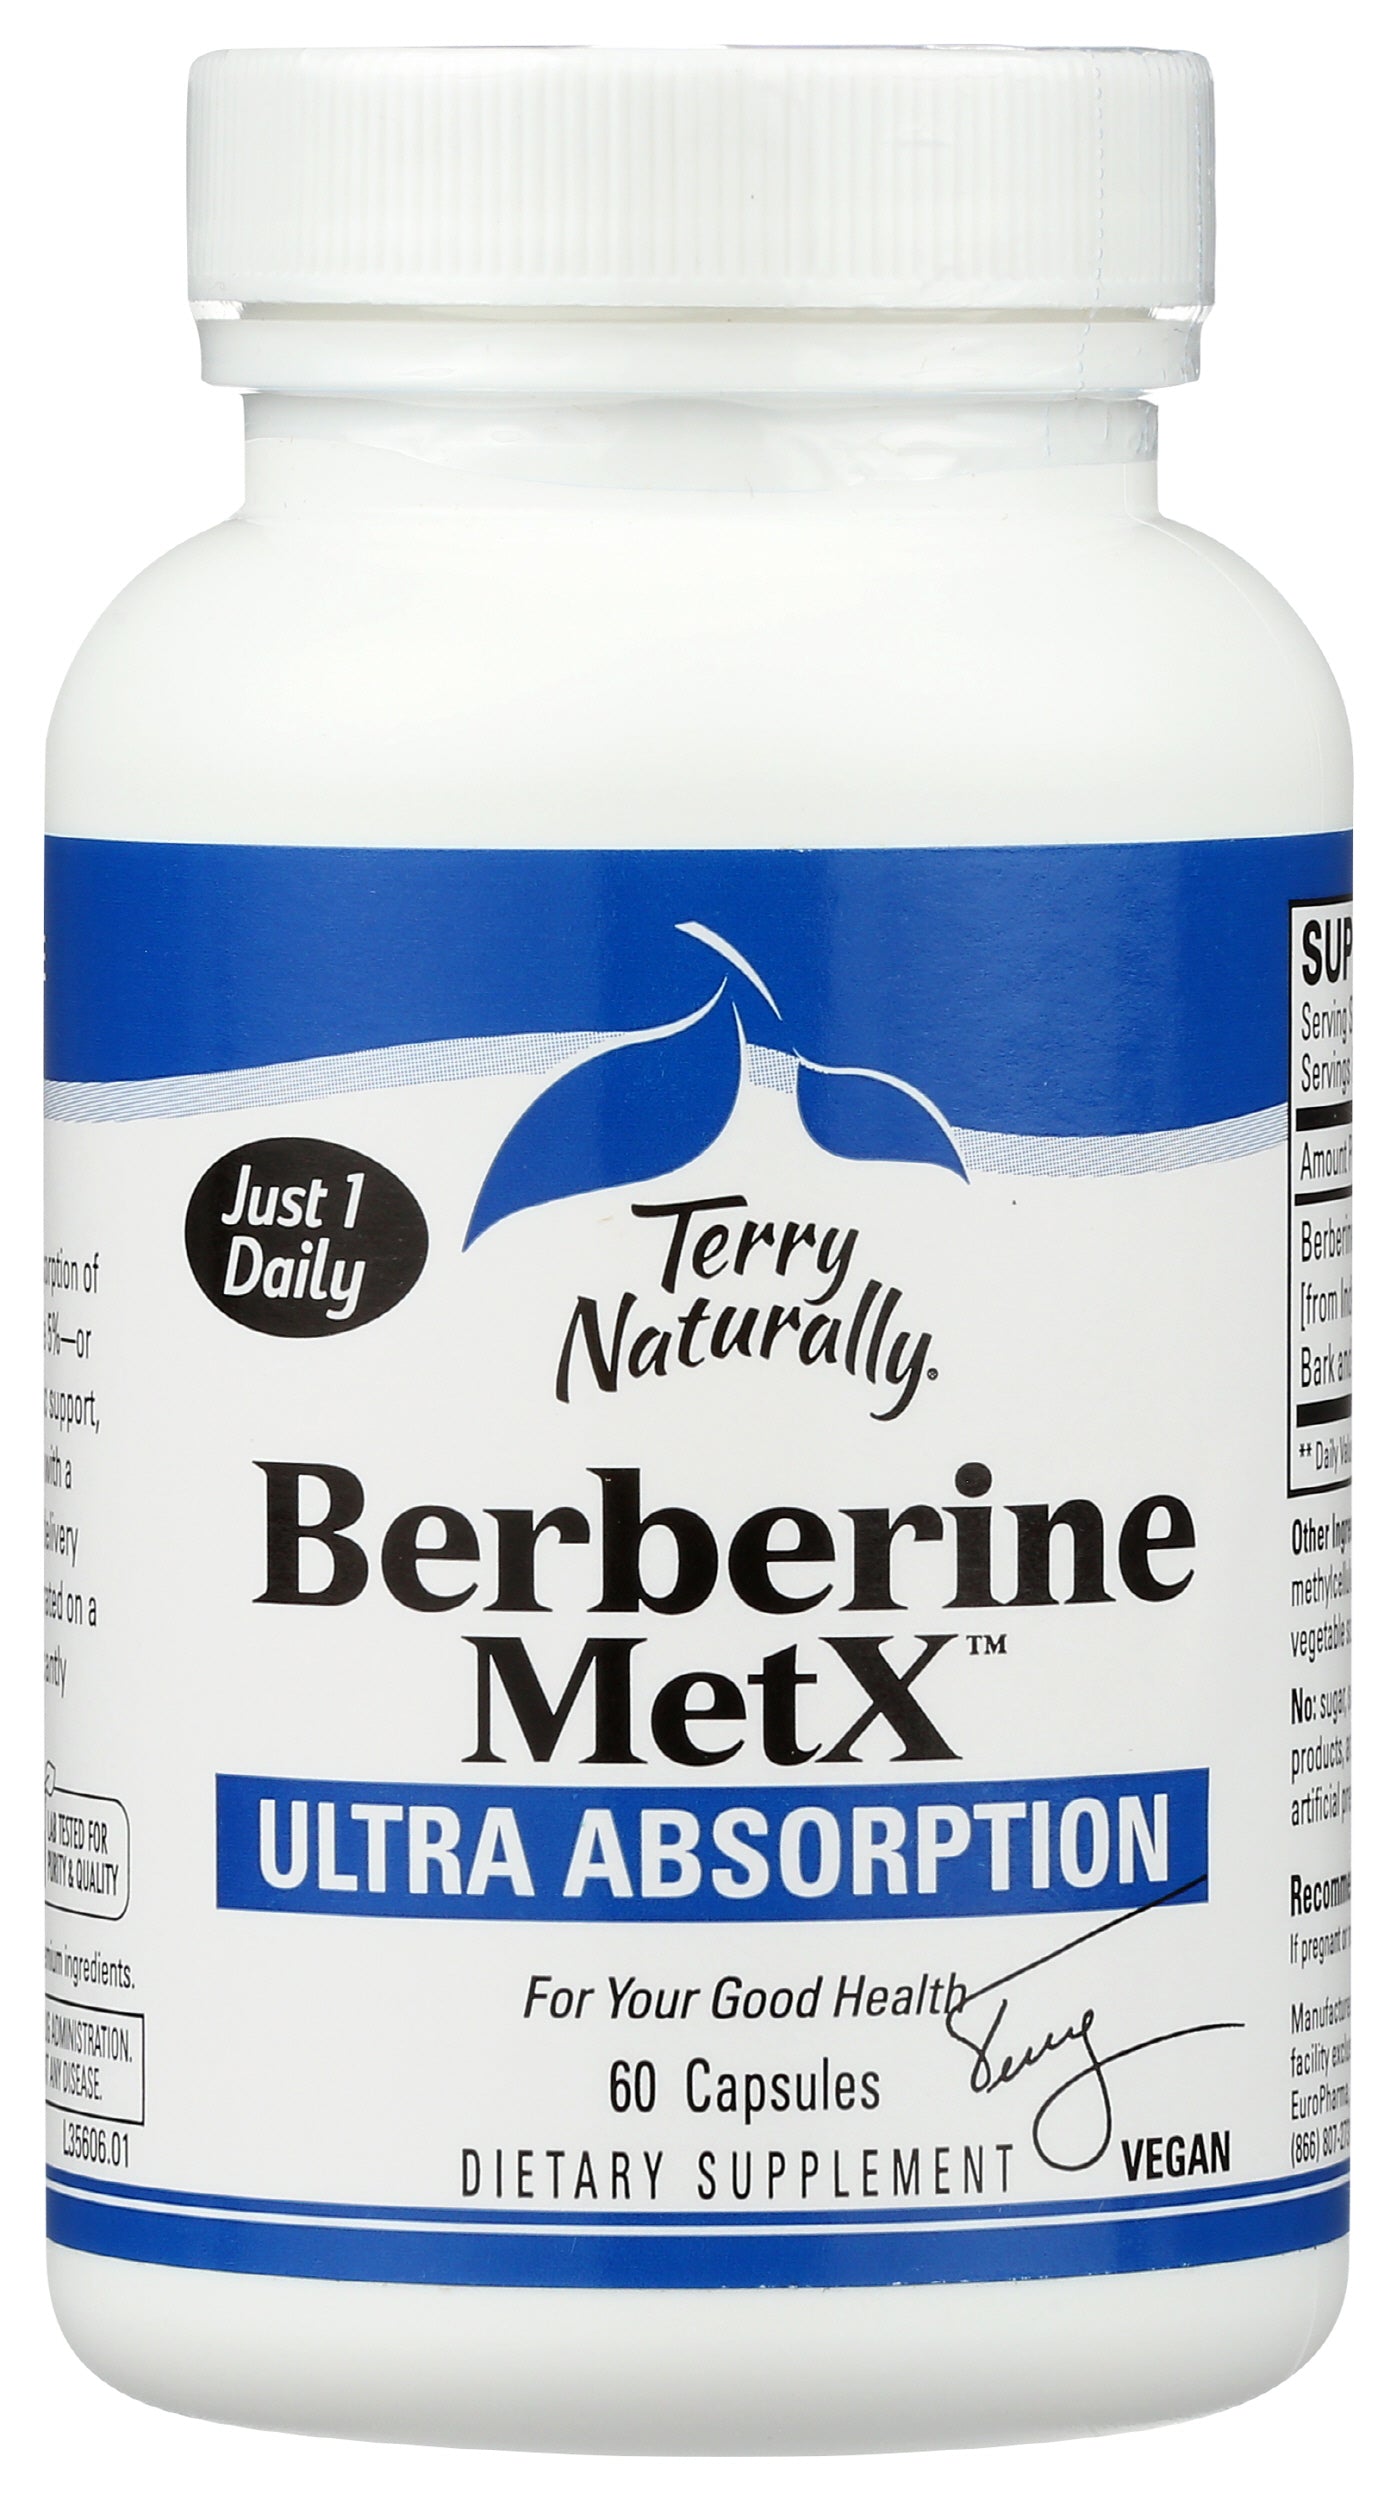 Terry Naturally Berberine MetX Ultra Absorption 60 Capsules